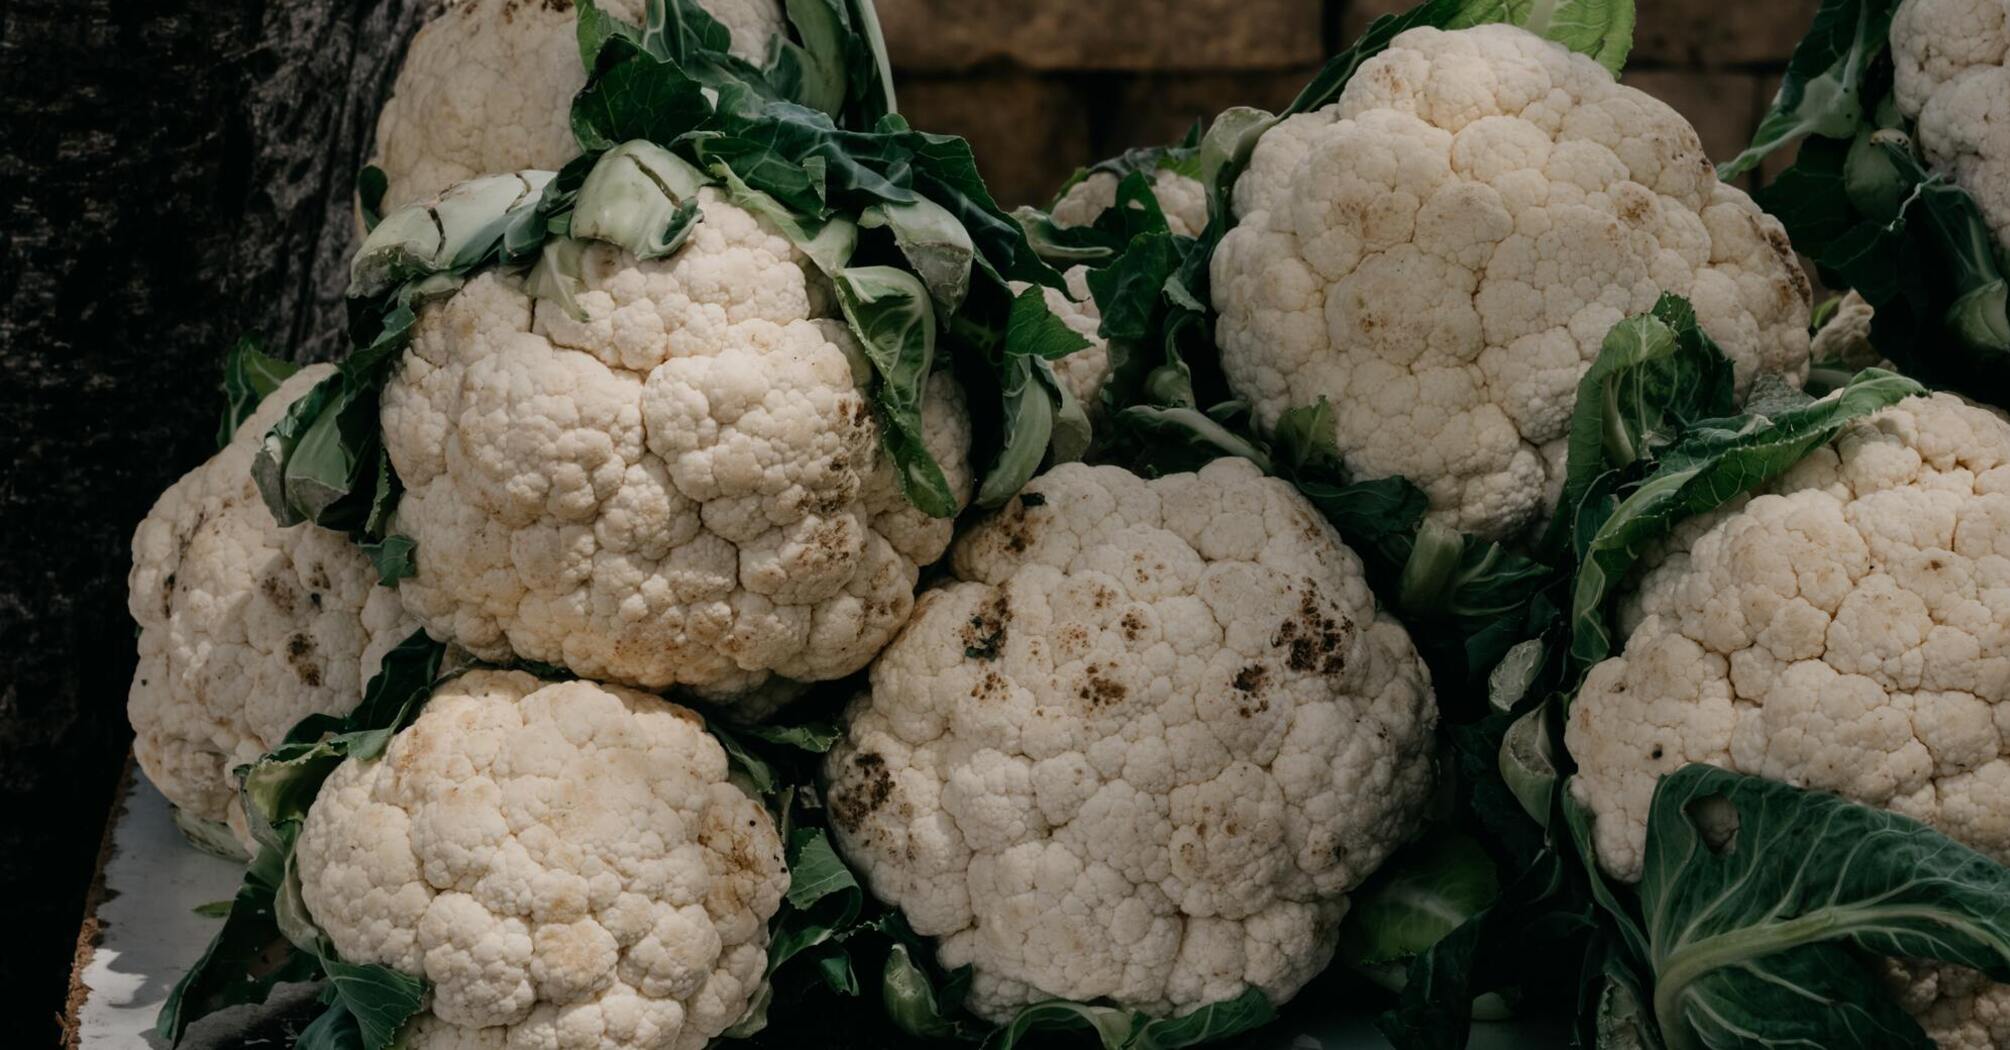 How to cook cauliflower deliciously: turns out crispy and without unpleasant odor